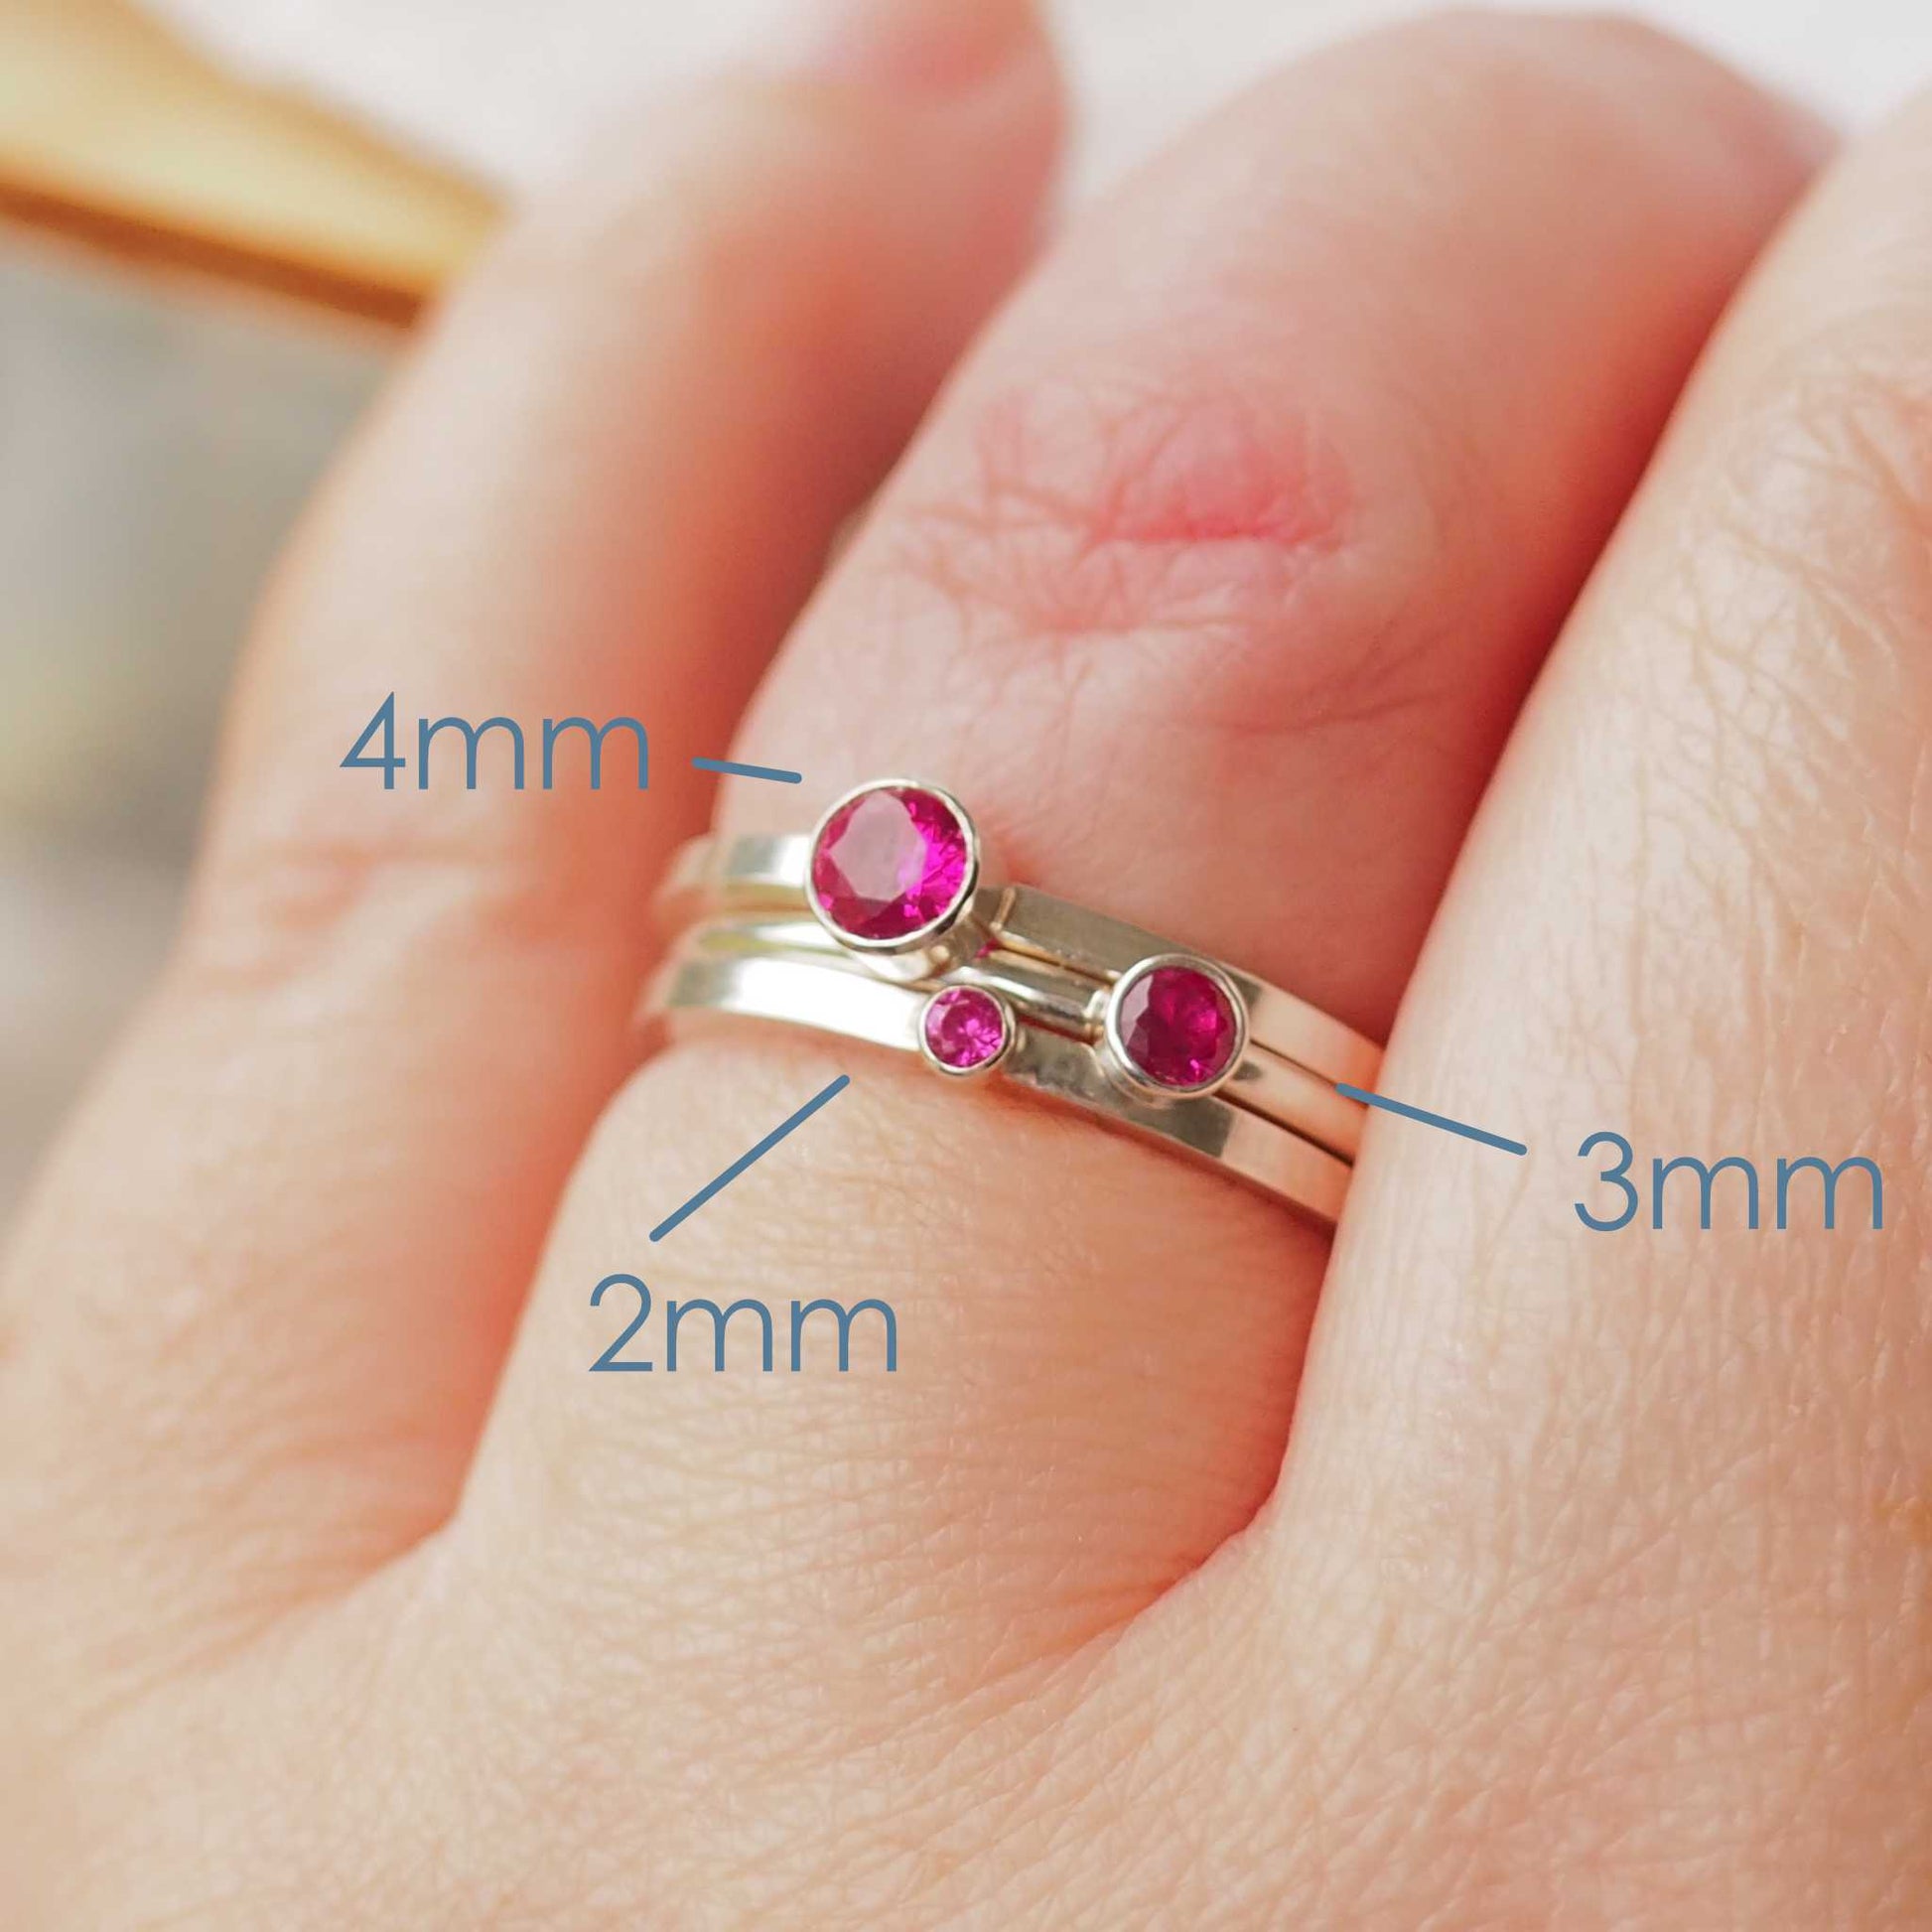 Three rings showing the square and round band styles with three different sized Cubic Zirconia in a Hot pink colour. The rings are made from Sterling Silver and a round rich pinky red  cubic zirconia measuring 2,3 or 4mm in size. Handmade by maram jewellery in Scotland